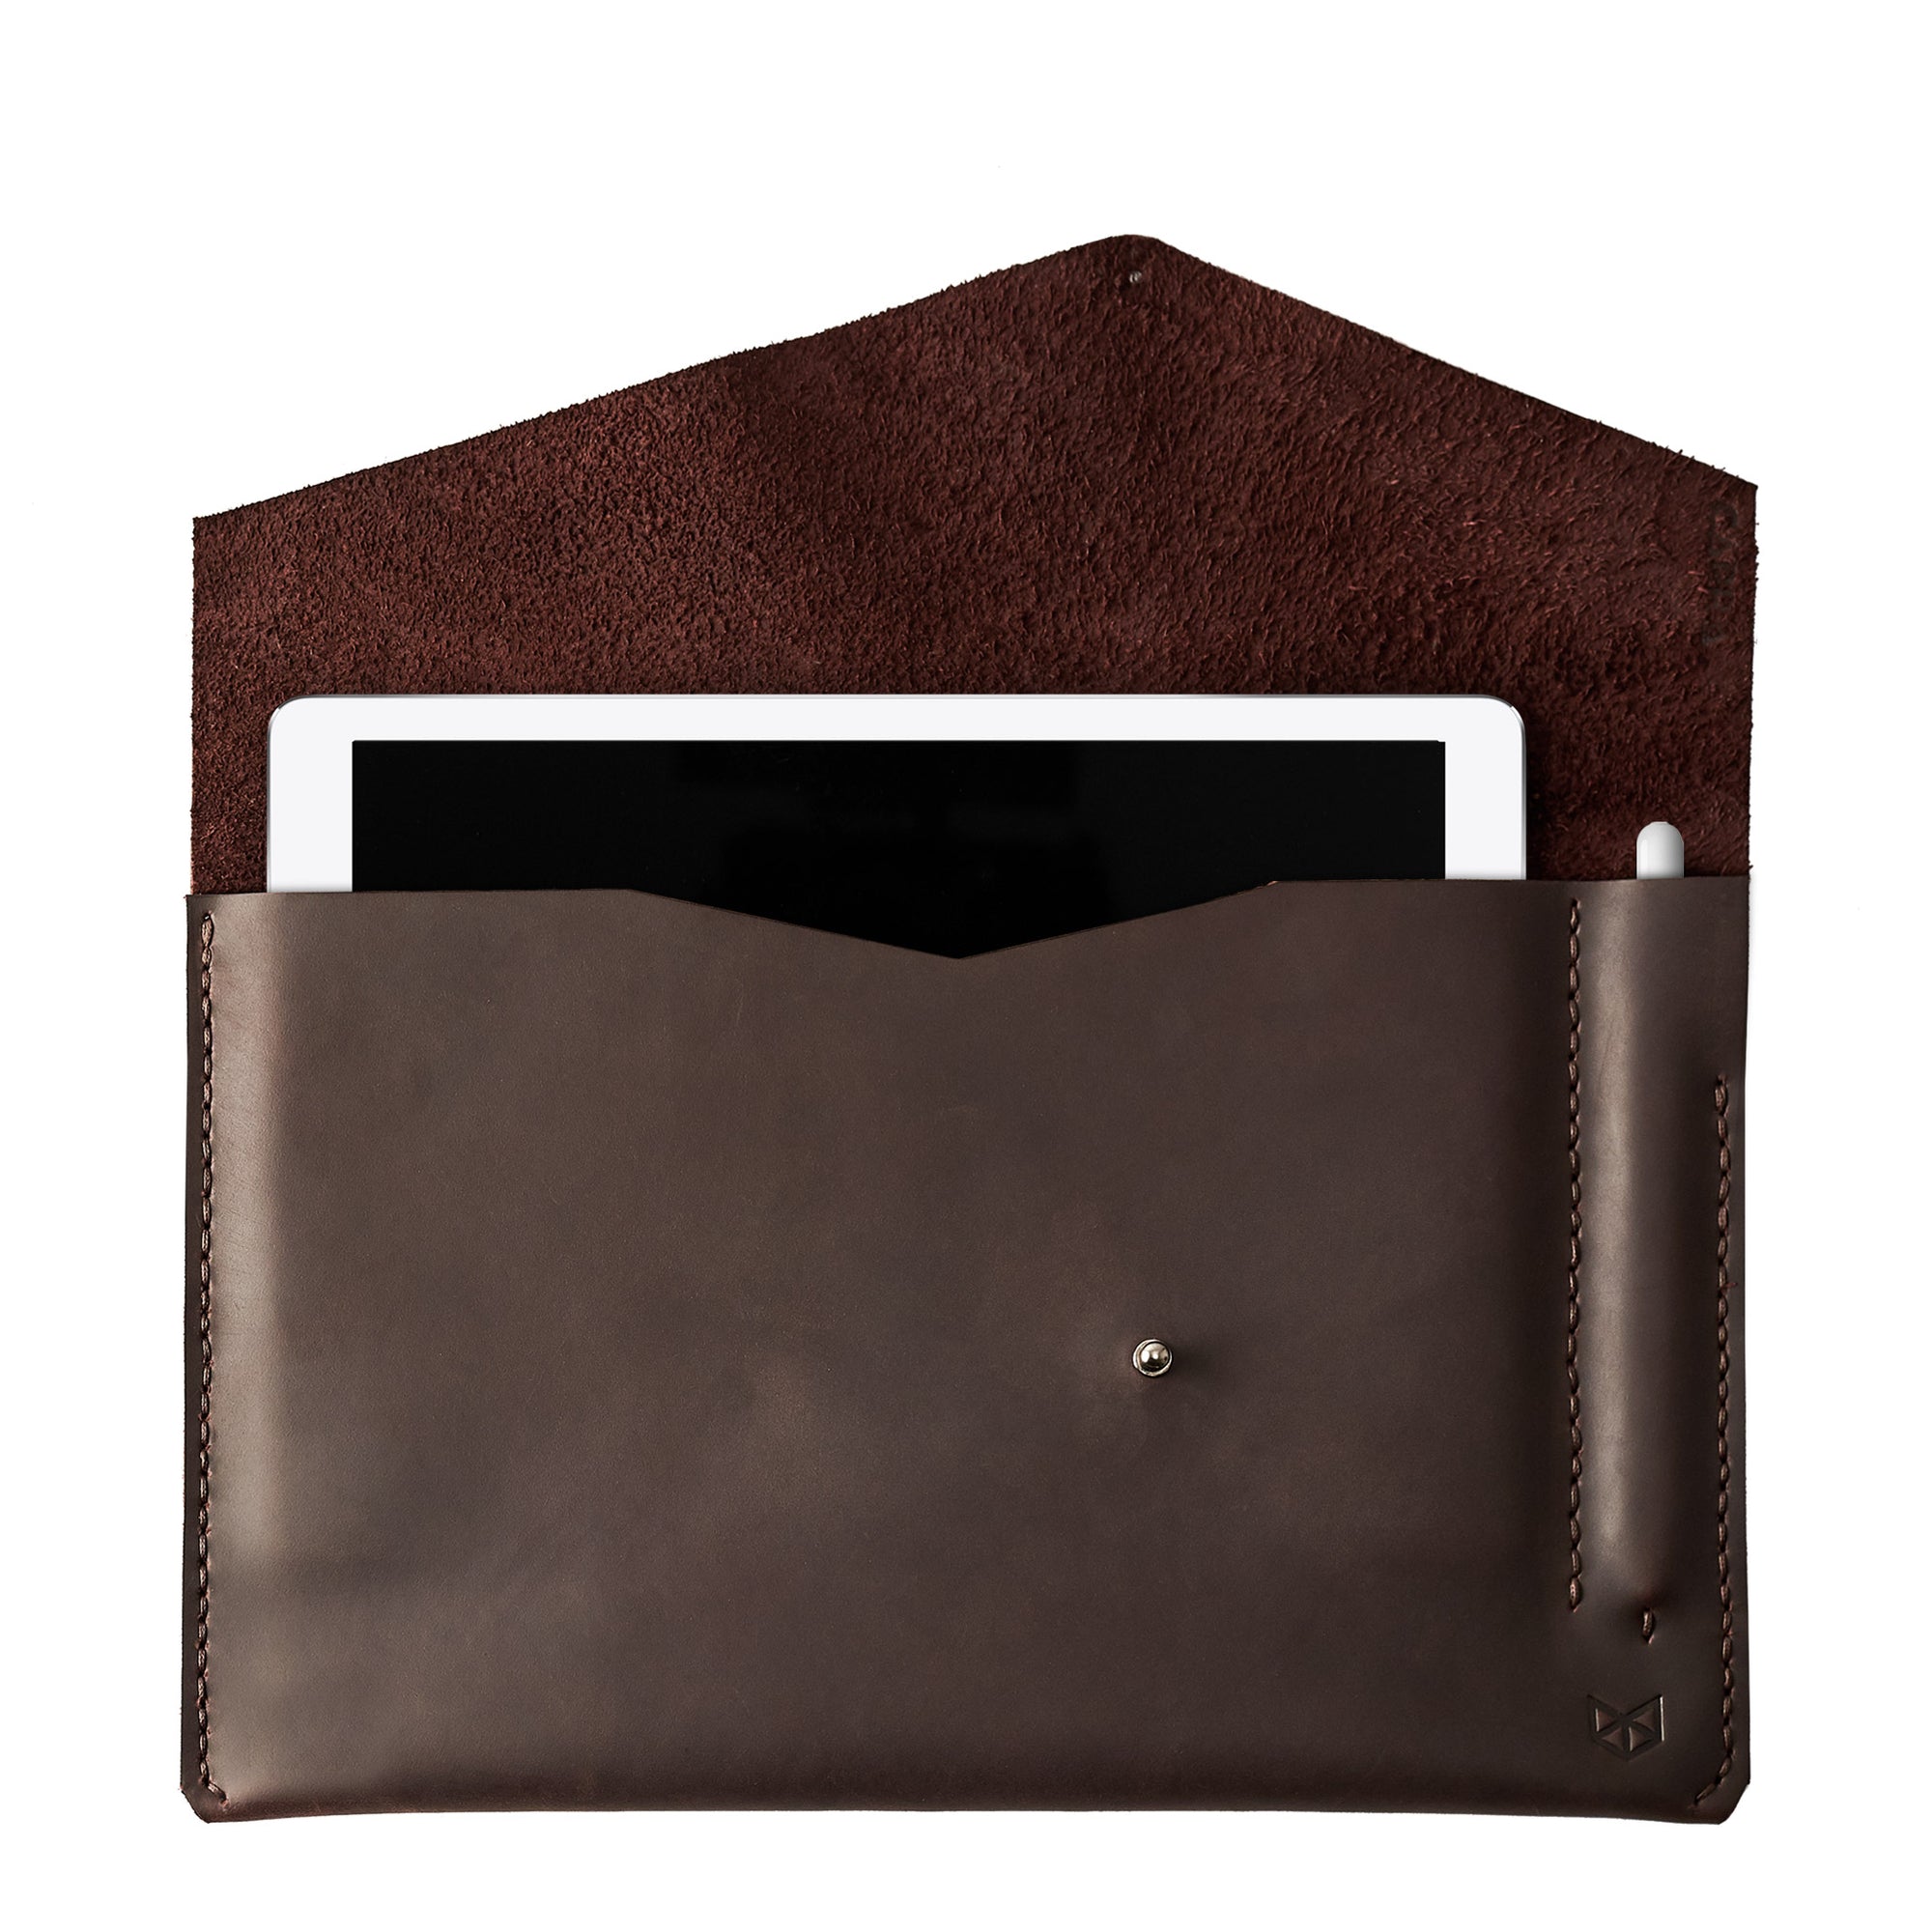 Dark brown leather sleeve for ASUS Zenbook Pro Duo. Mens gifts